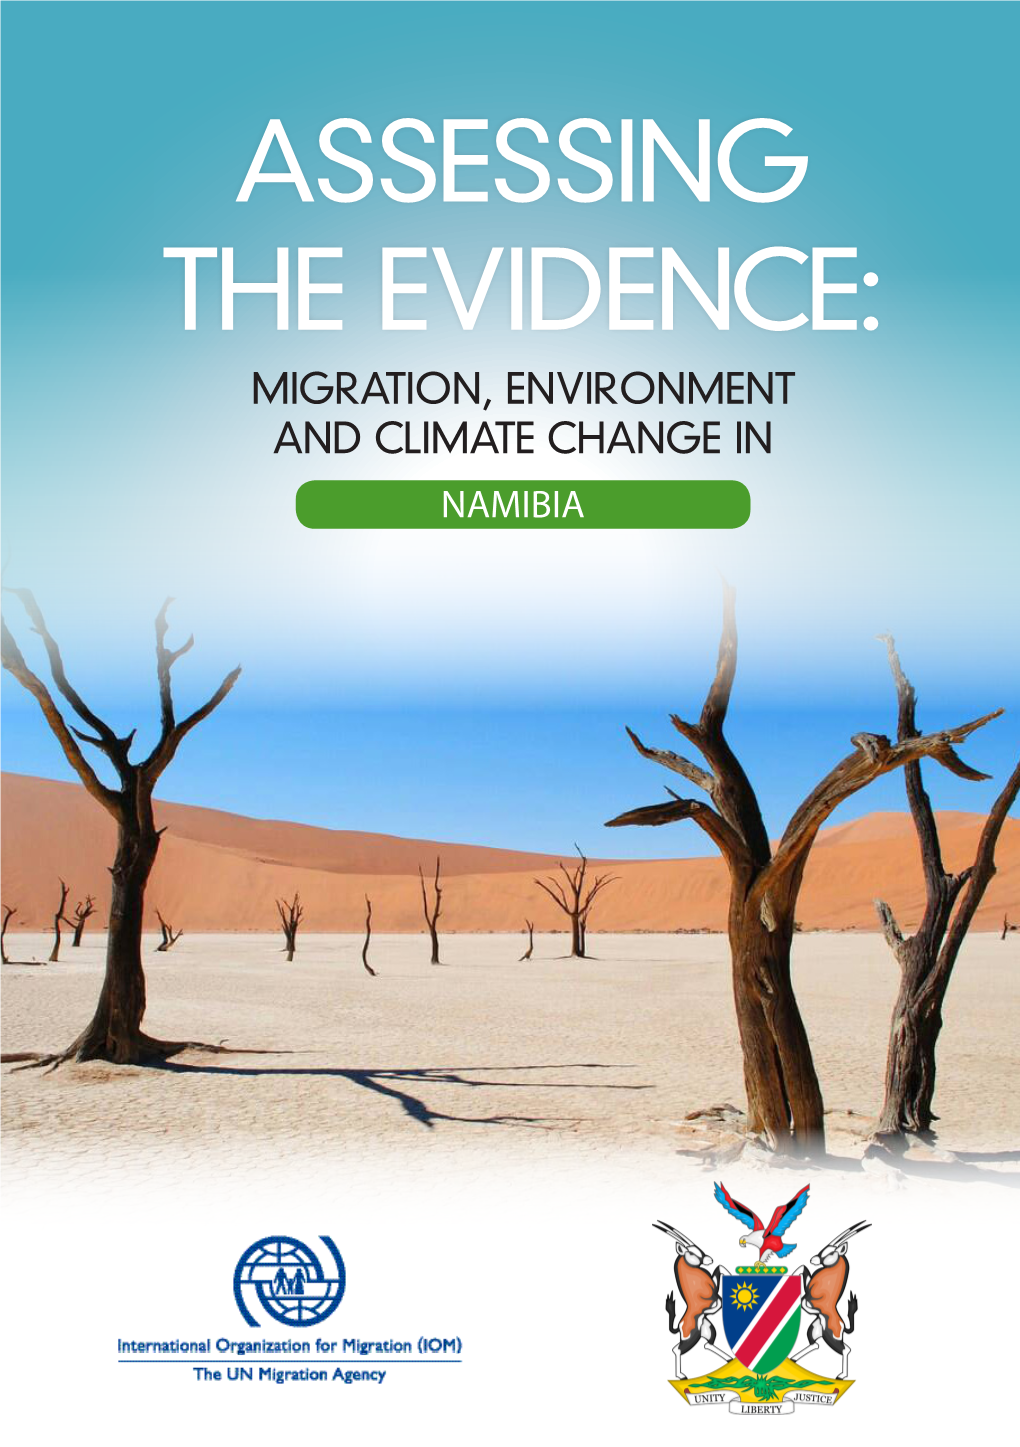 NAMIBIA This Publication Has Been Produced with Financial Assistance from the International Organization for Migration (IOM) Development Fund